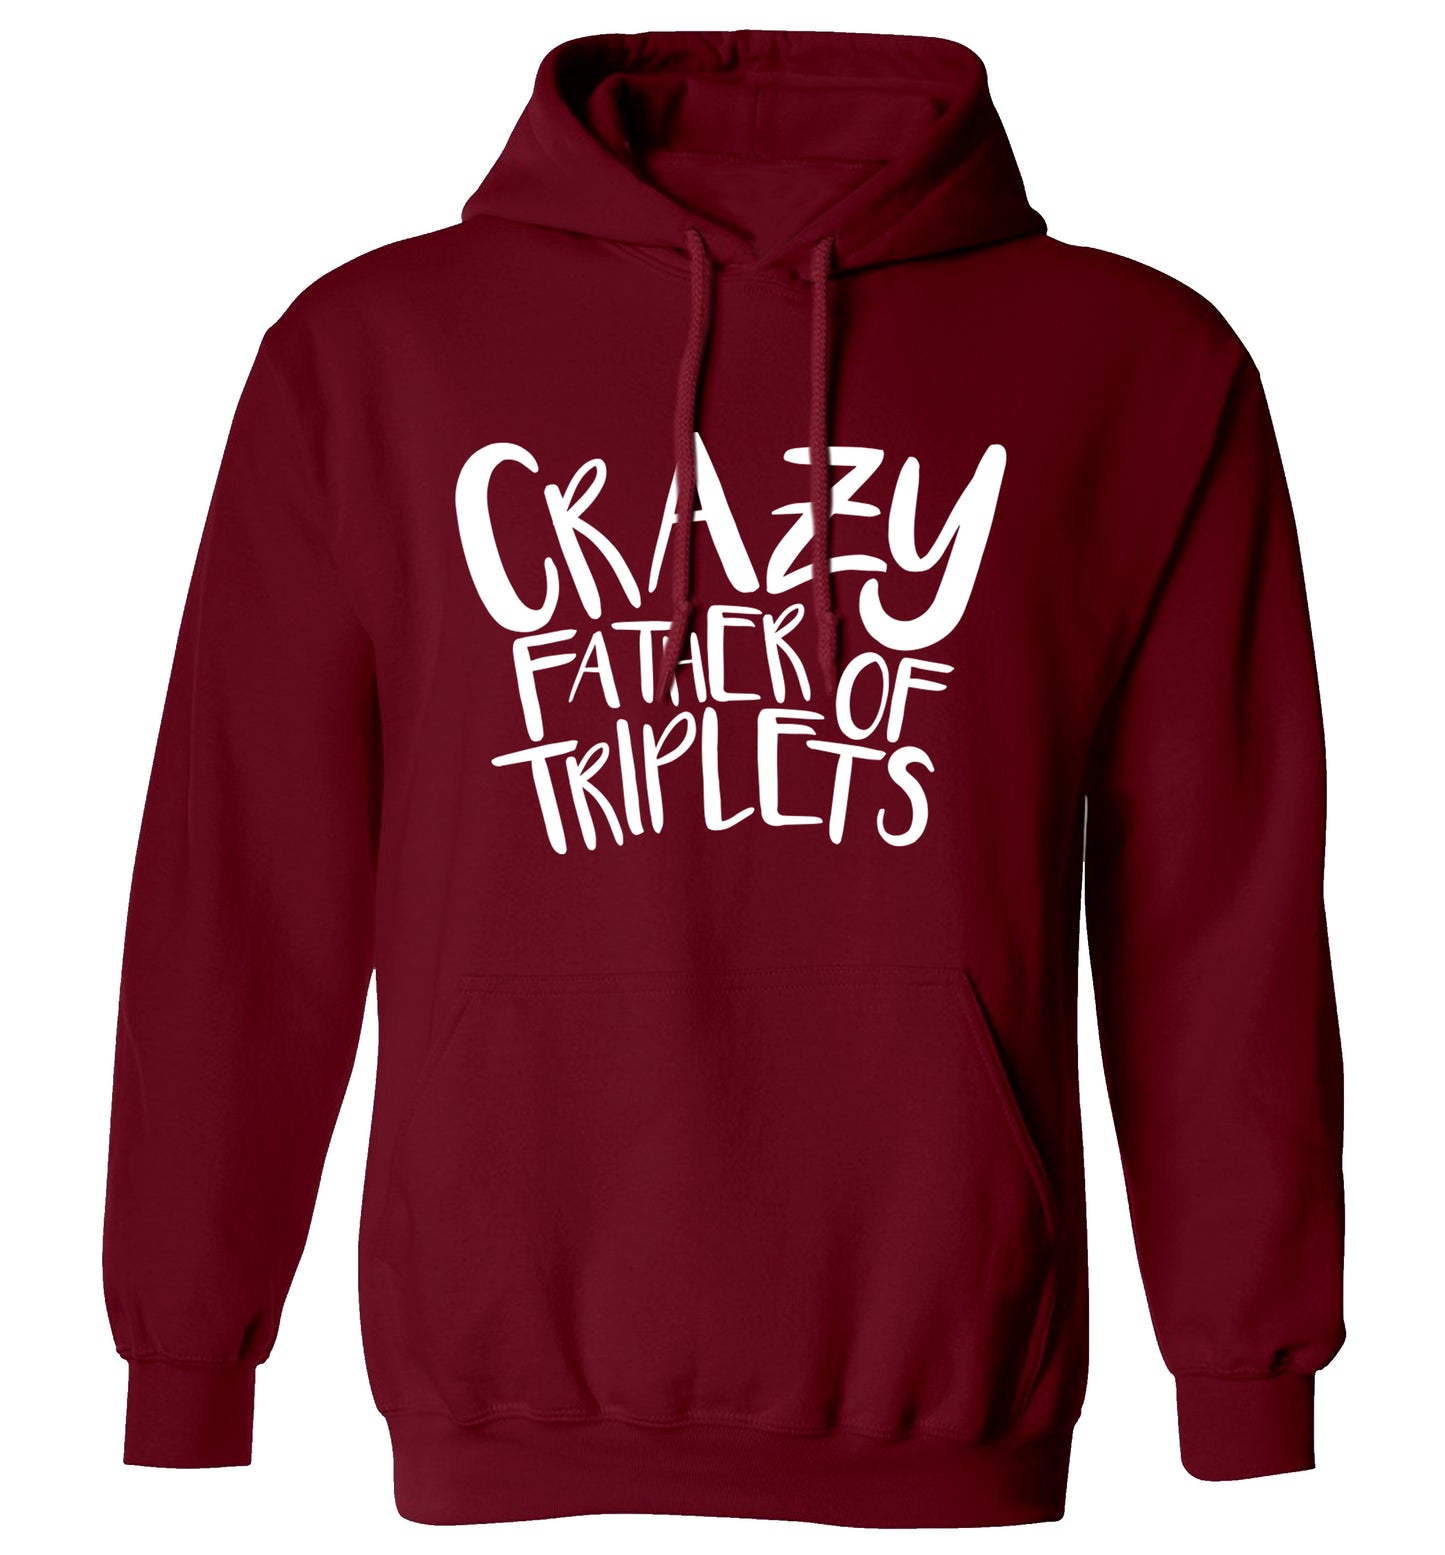 Crazy father of triplets adults unisex maroon hoodie 2XL